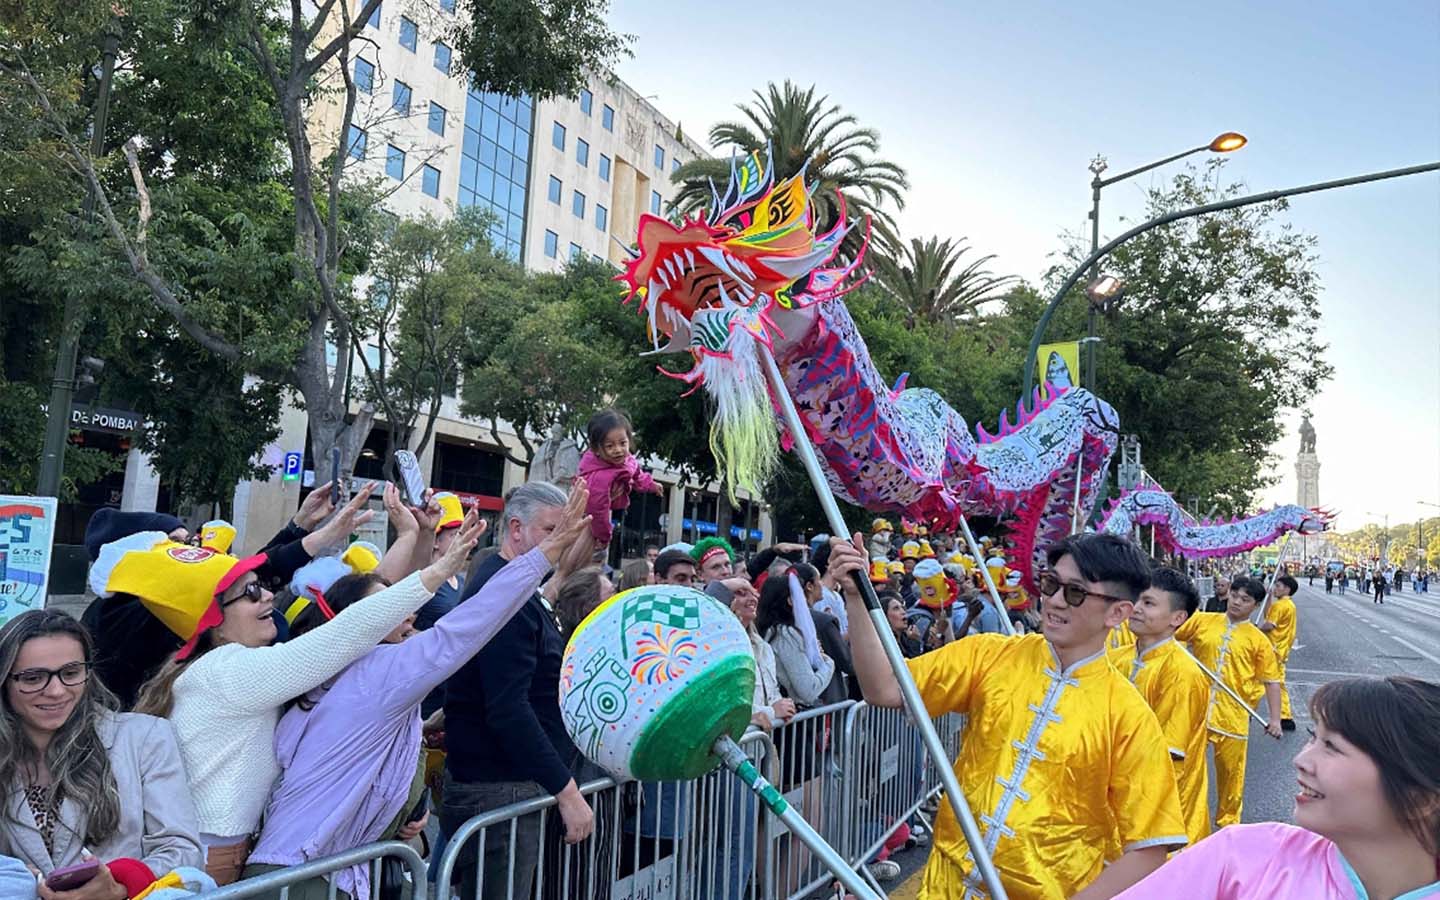 Dragon dancers from Macao take part in Lisbon’s iconic parade